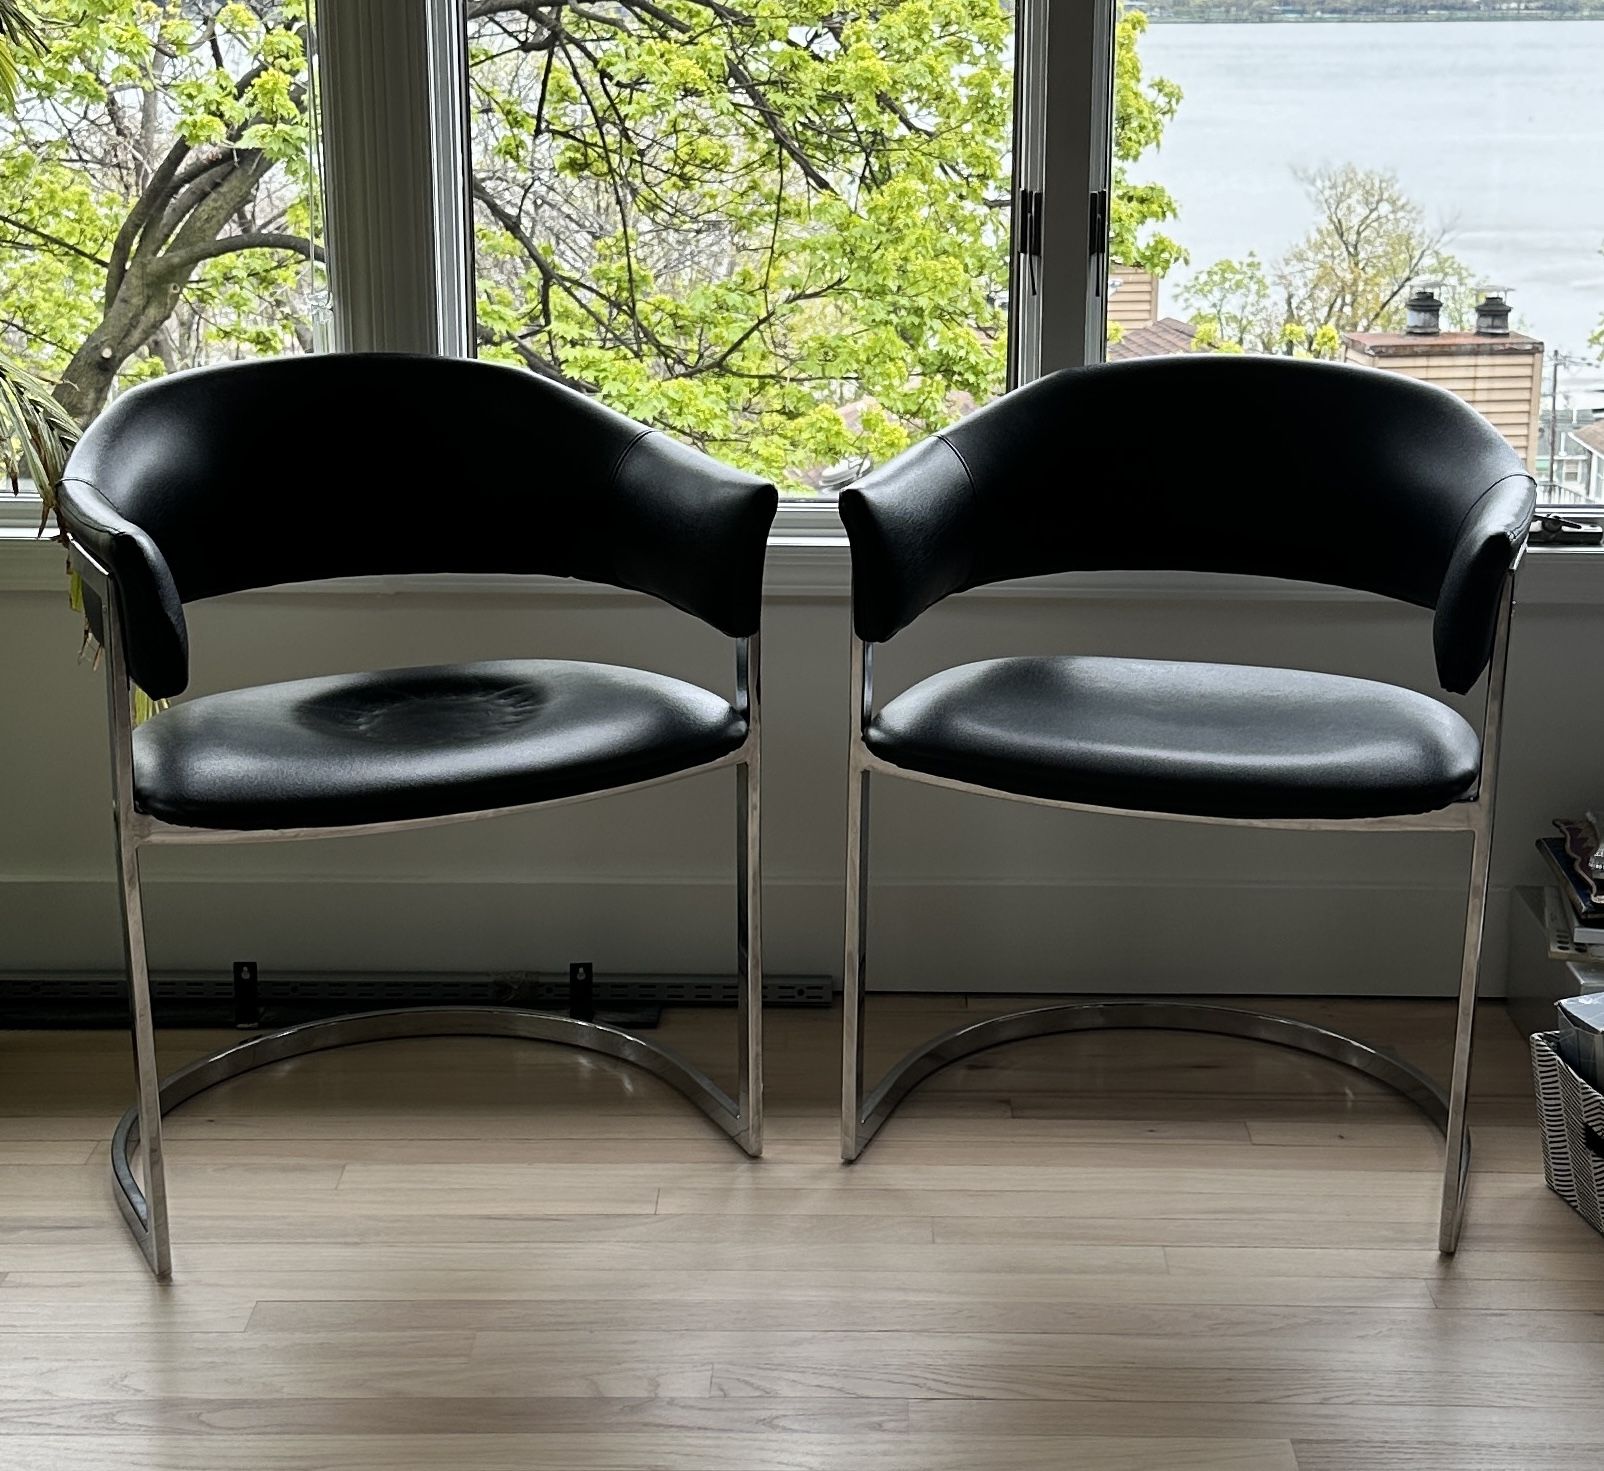 2 modern black leather chairs 